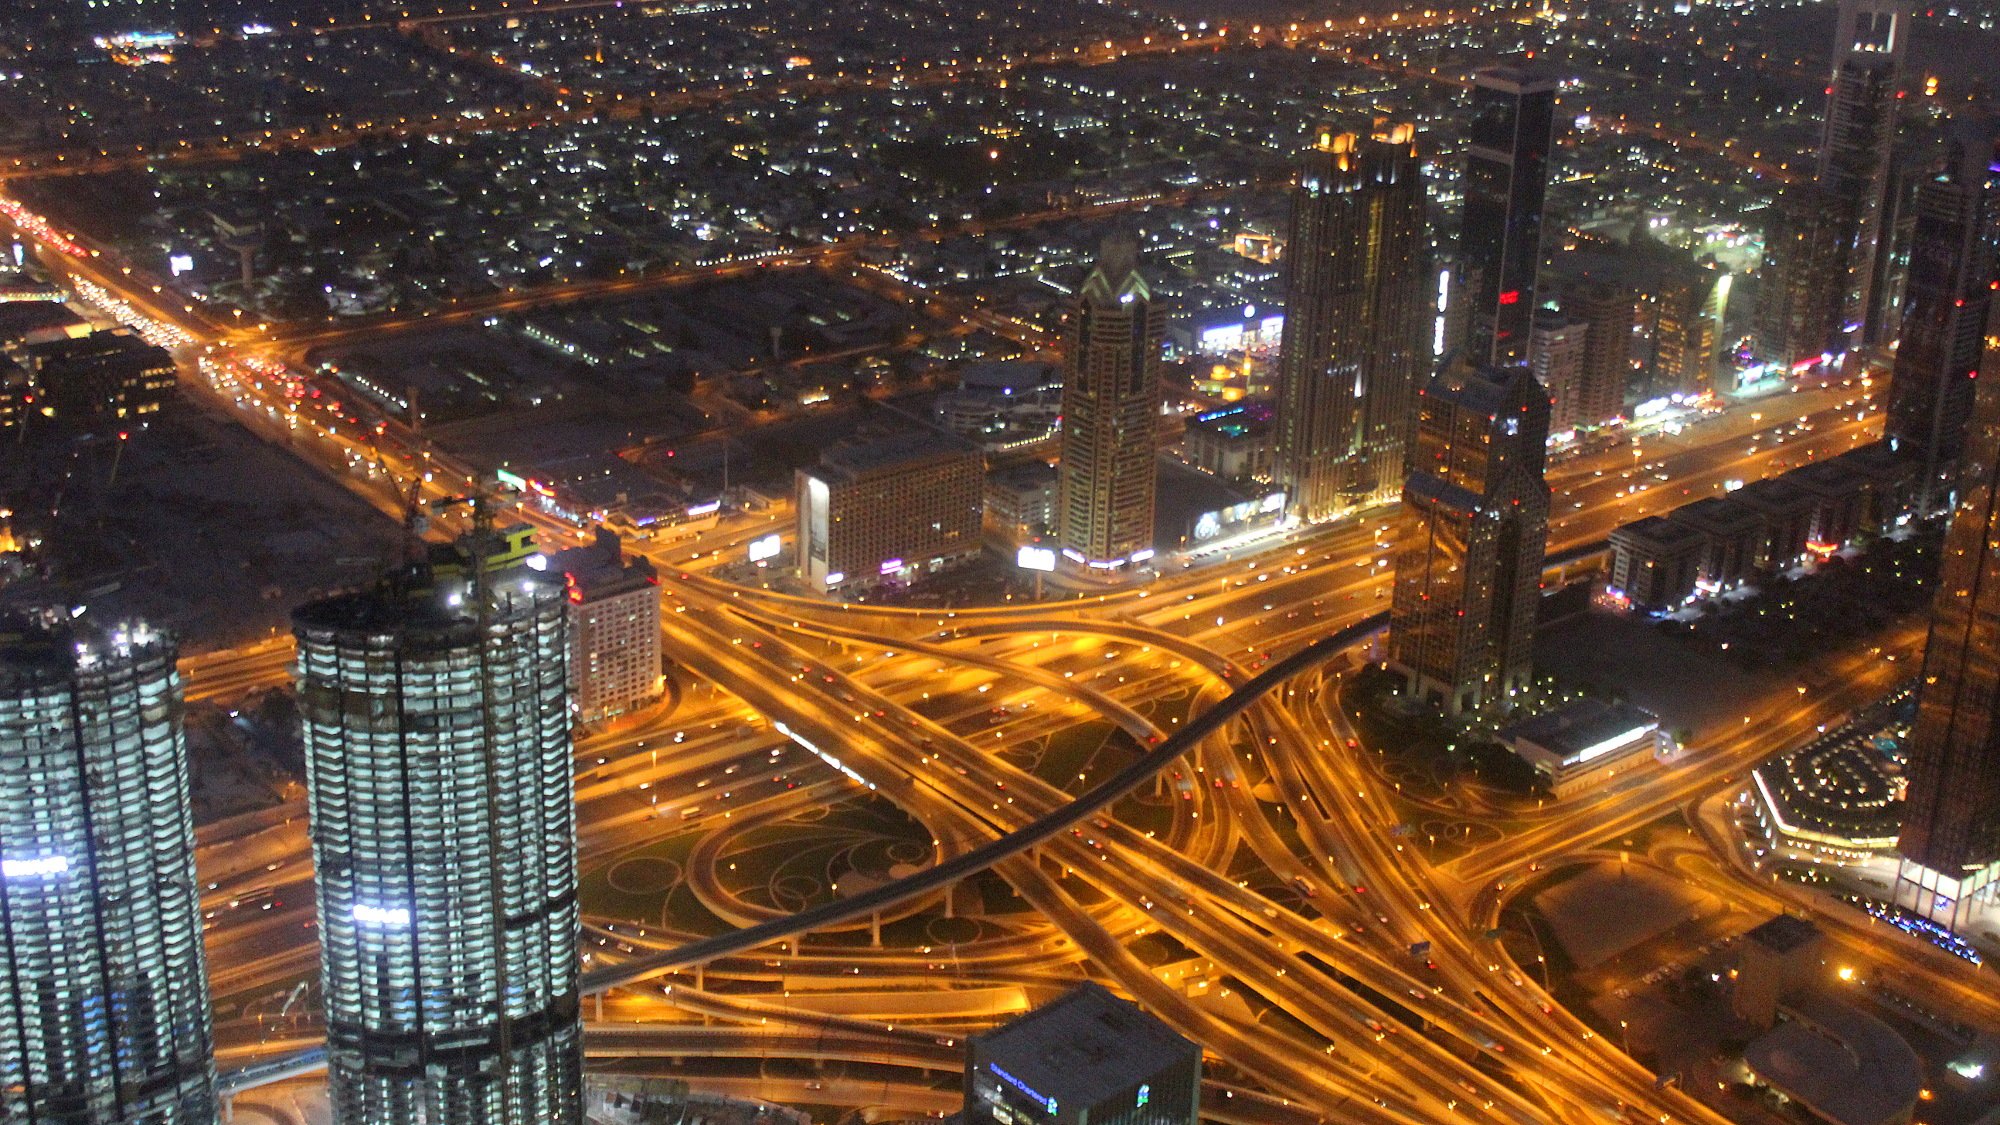 A view of Dubai from Burj Khalifa observation deck at night with lighted highways.